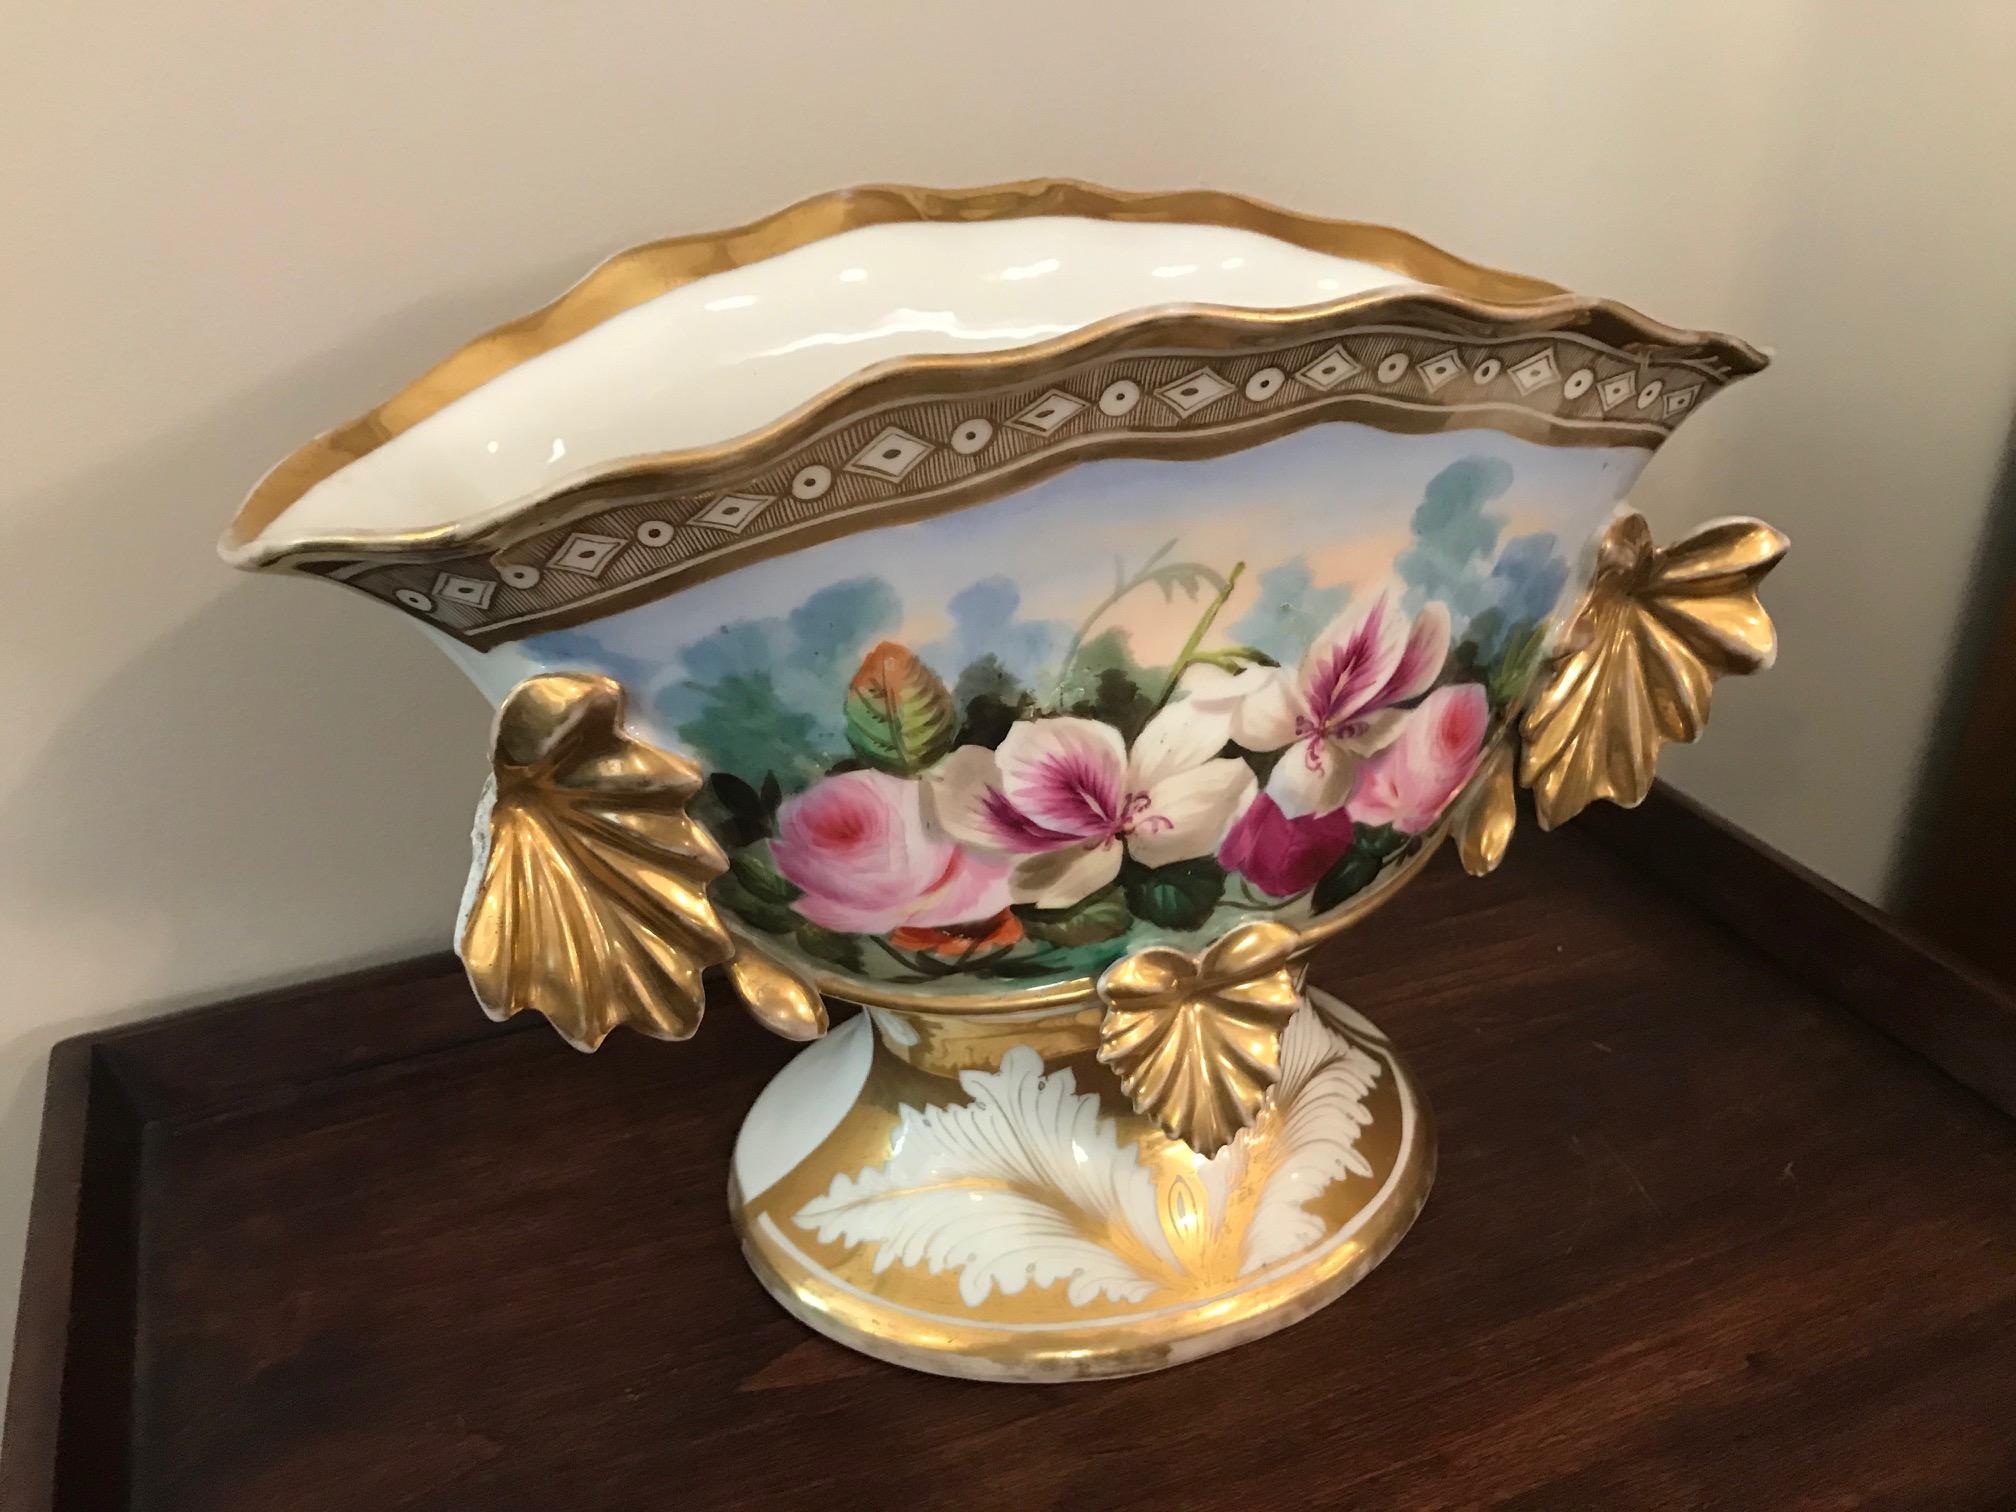 Beautiful 19th century French flower decoration porcelain wedding vase from the 1950s.
Pink and gold flowers decoration. 